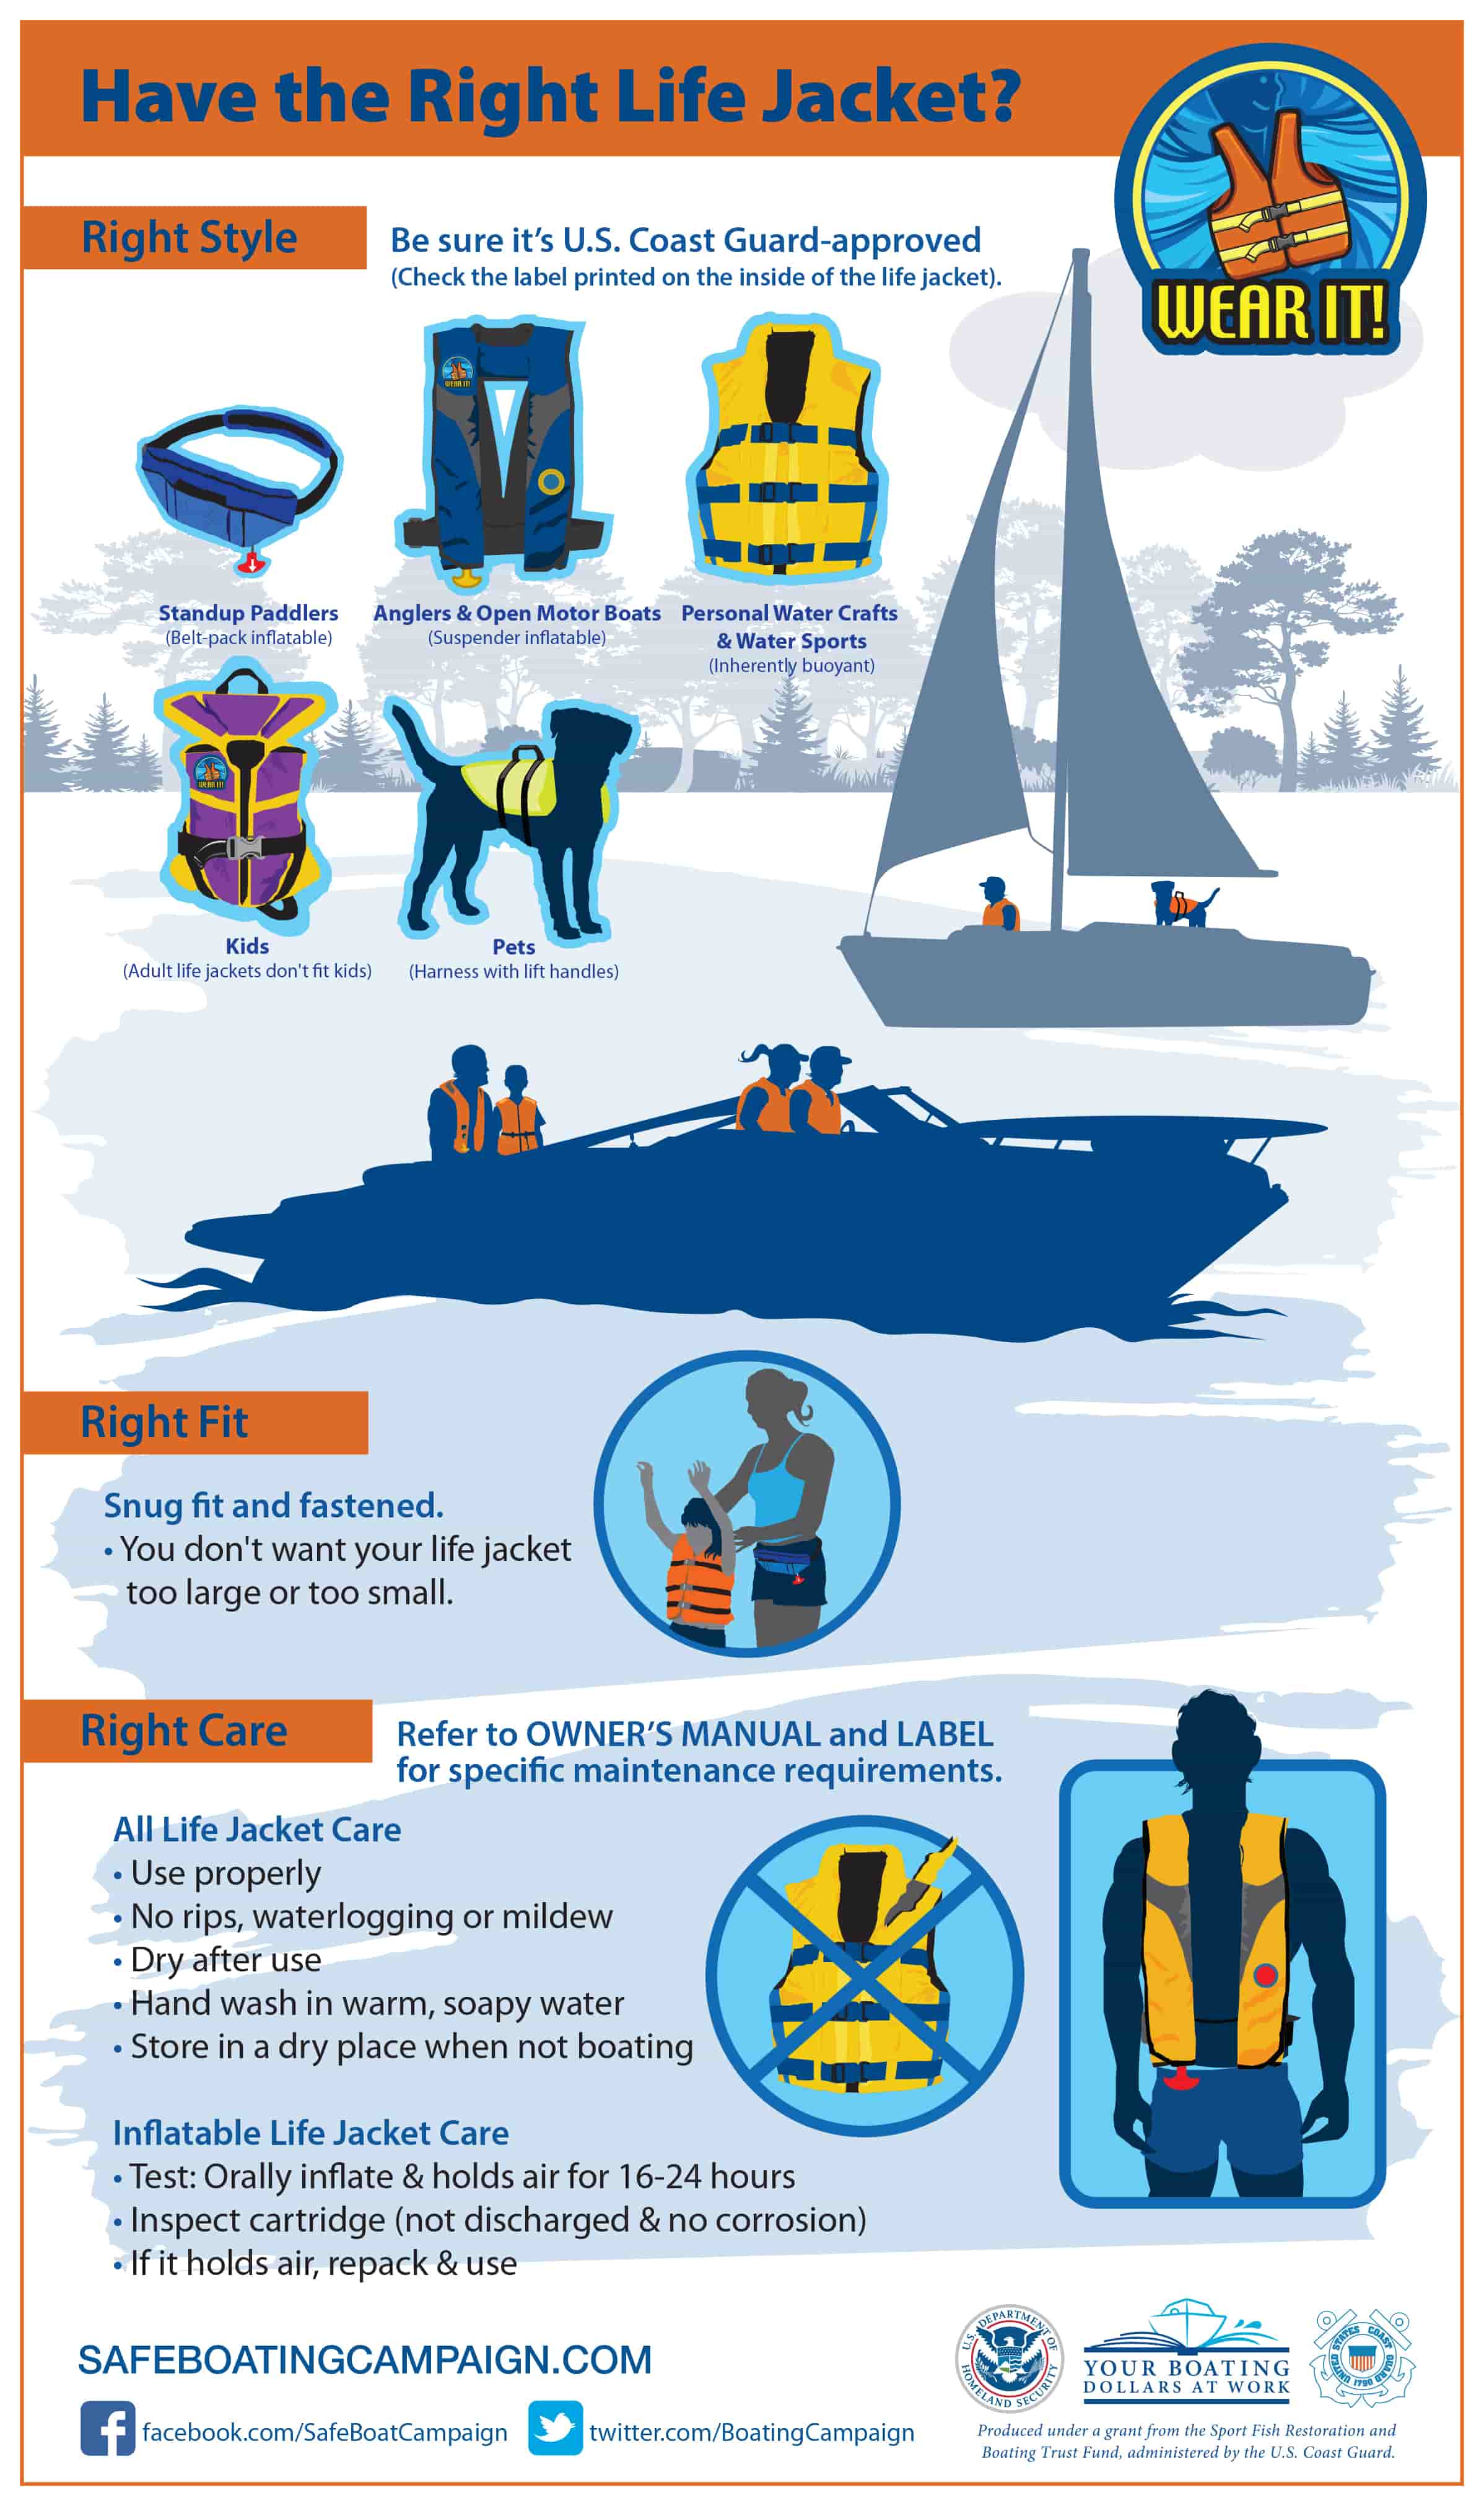 Have the Right Life Jacket Infographic